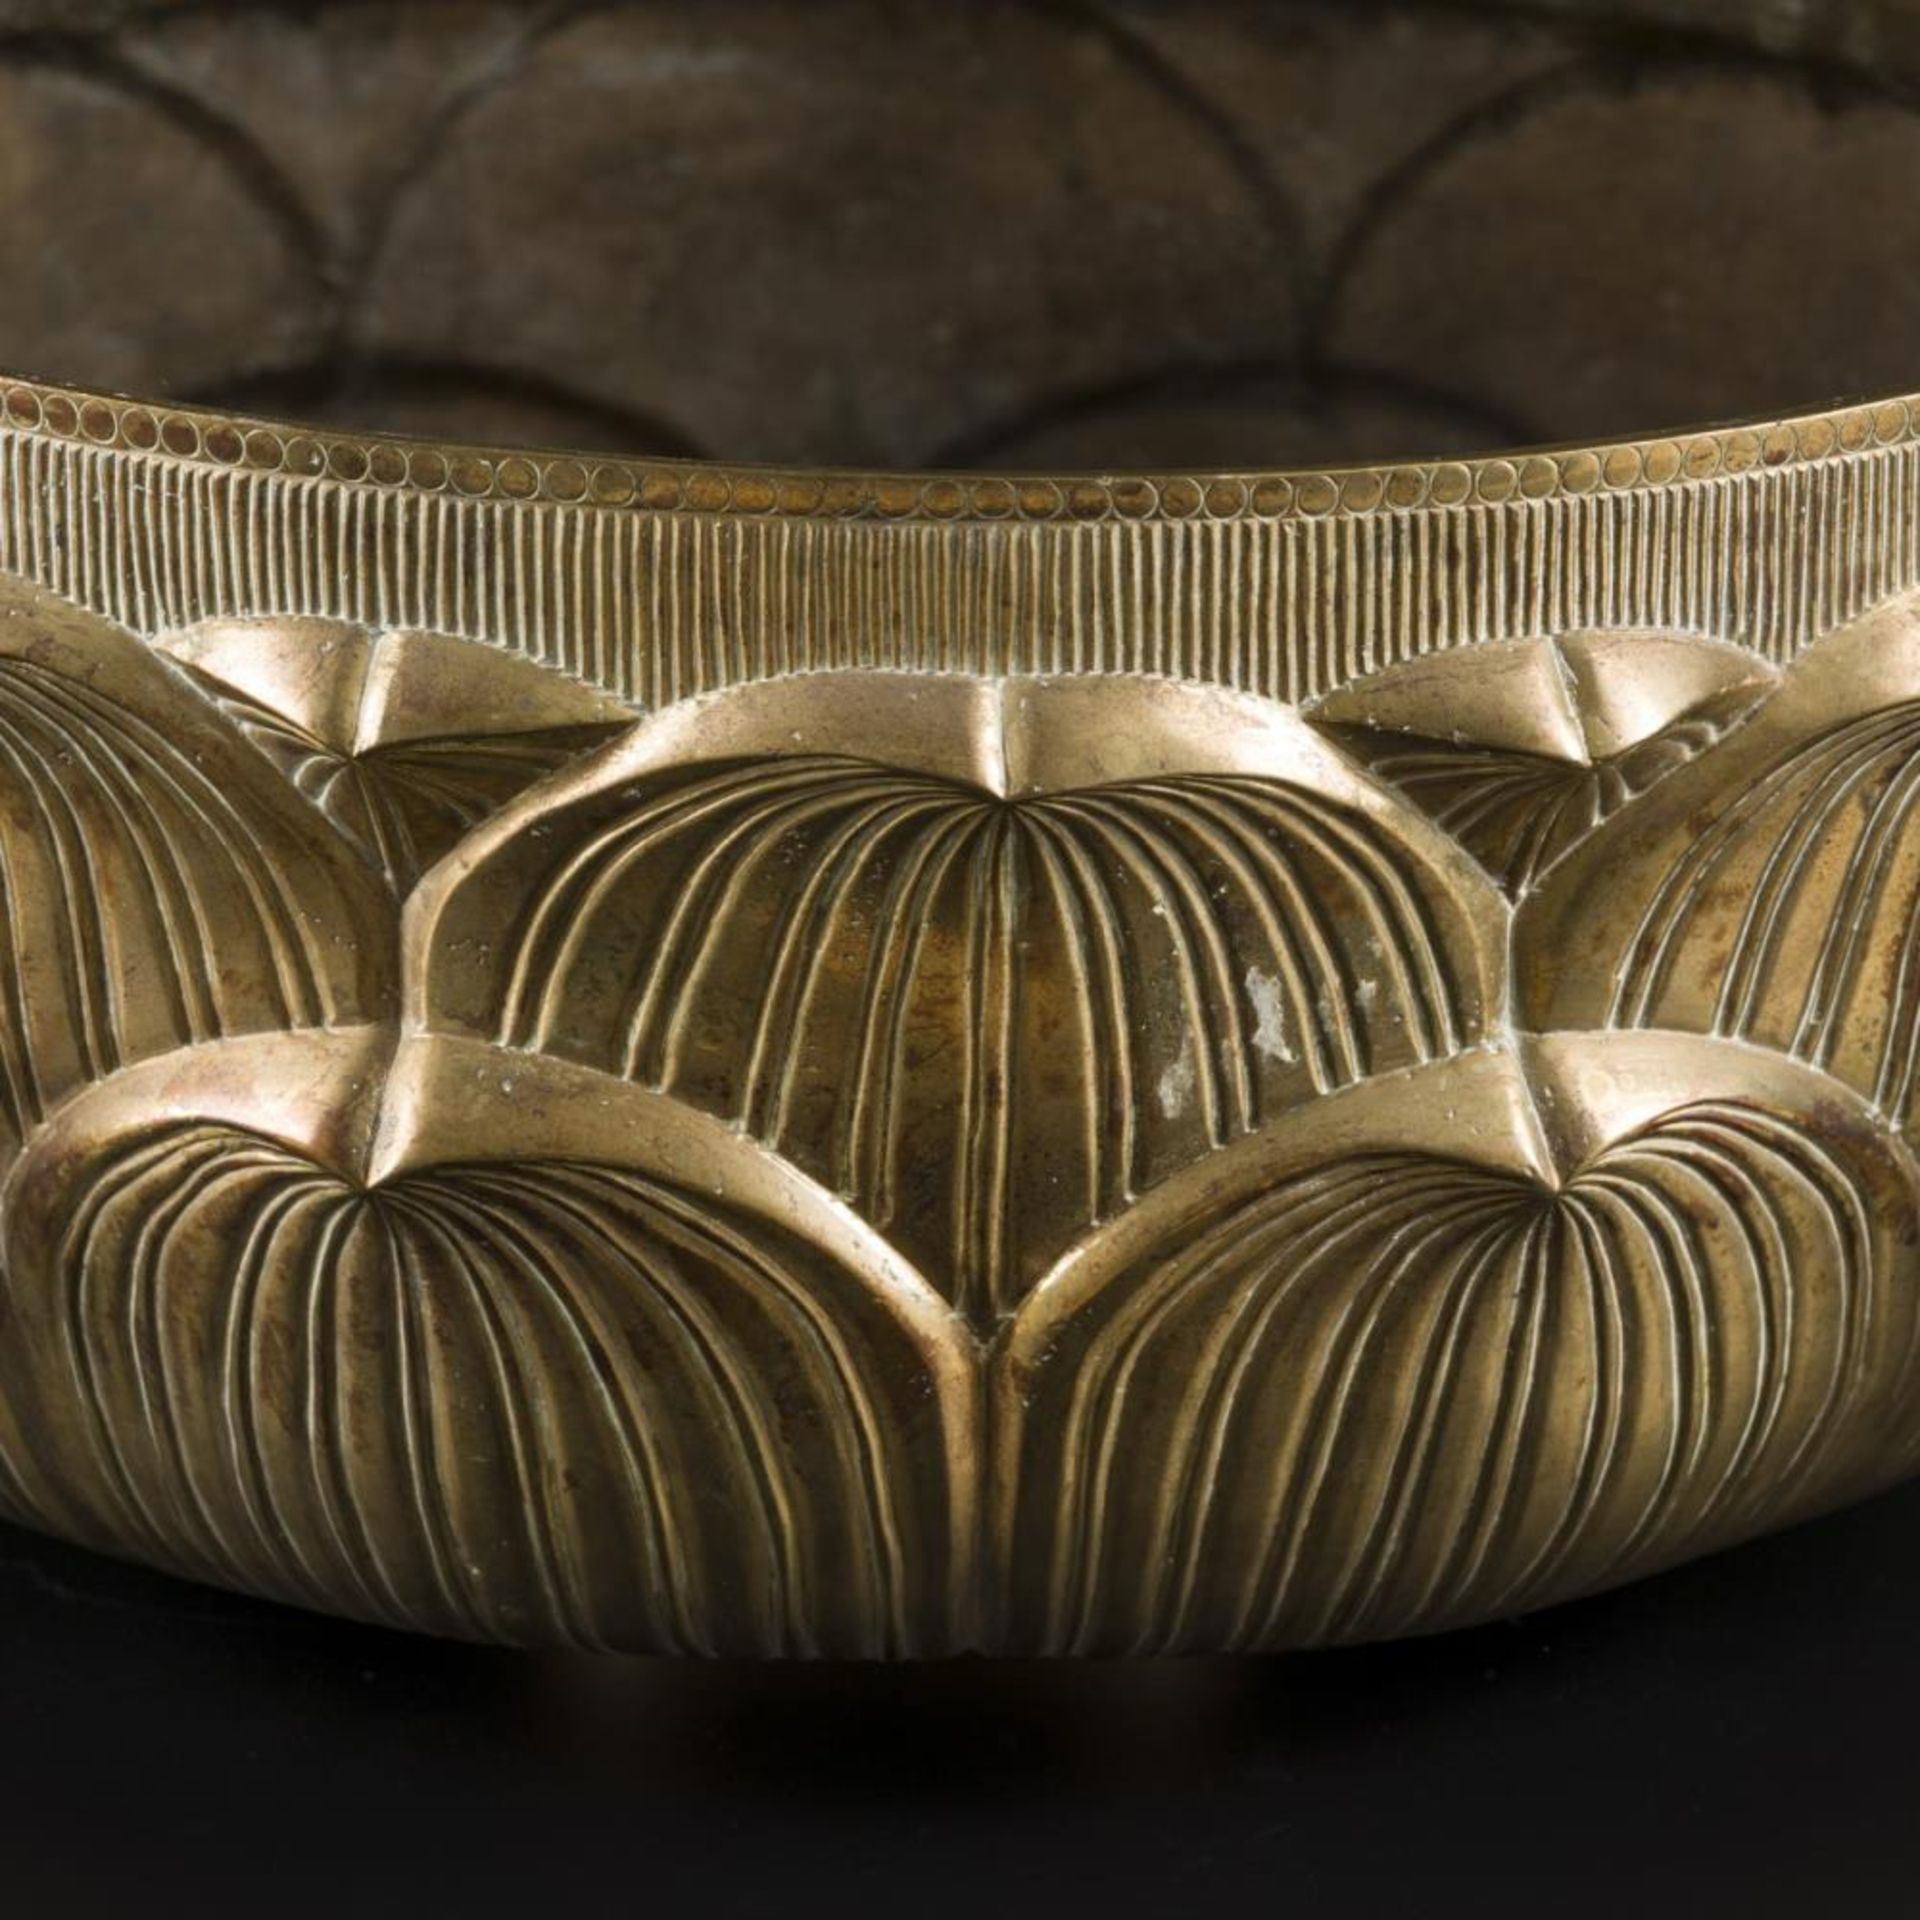 A brass lotus-shaped bowl, China, early 20th century. - Image 6 of 6